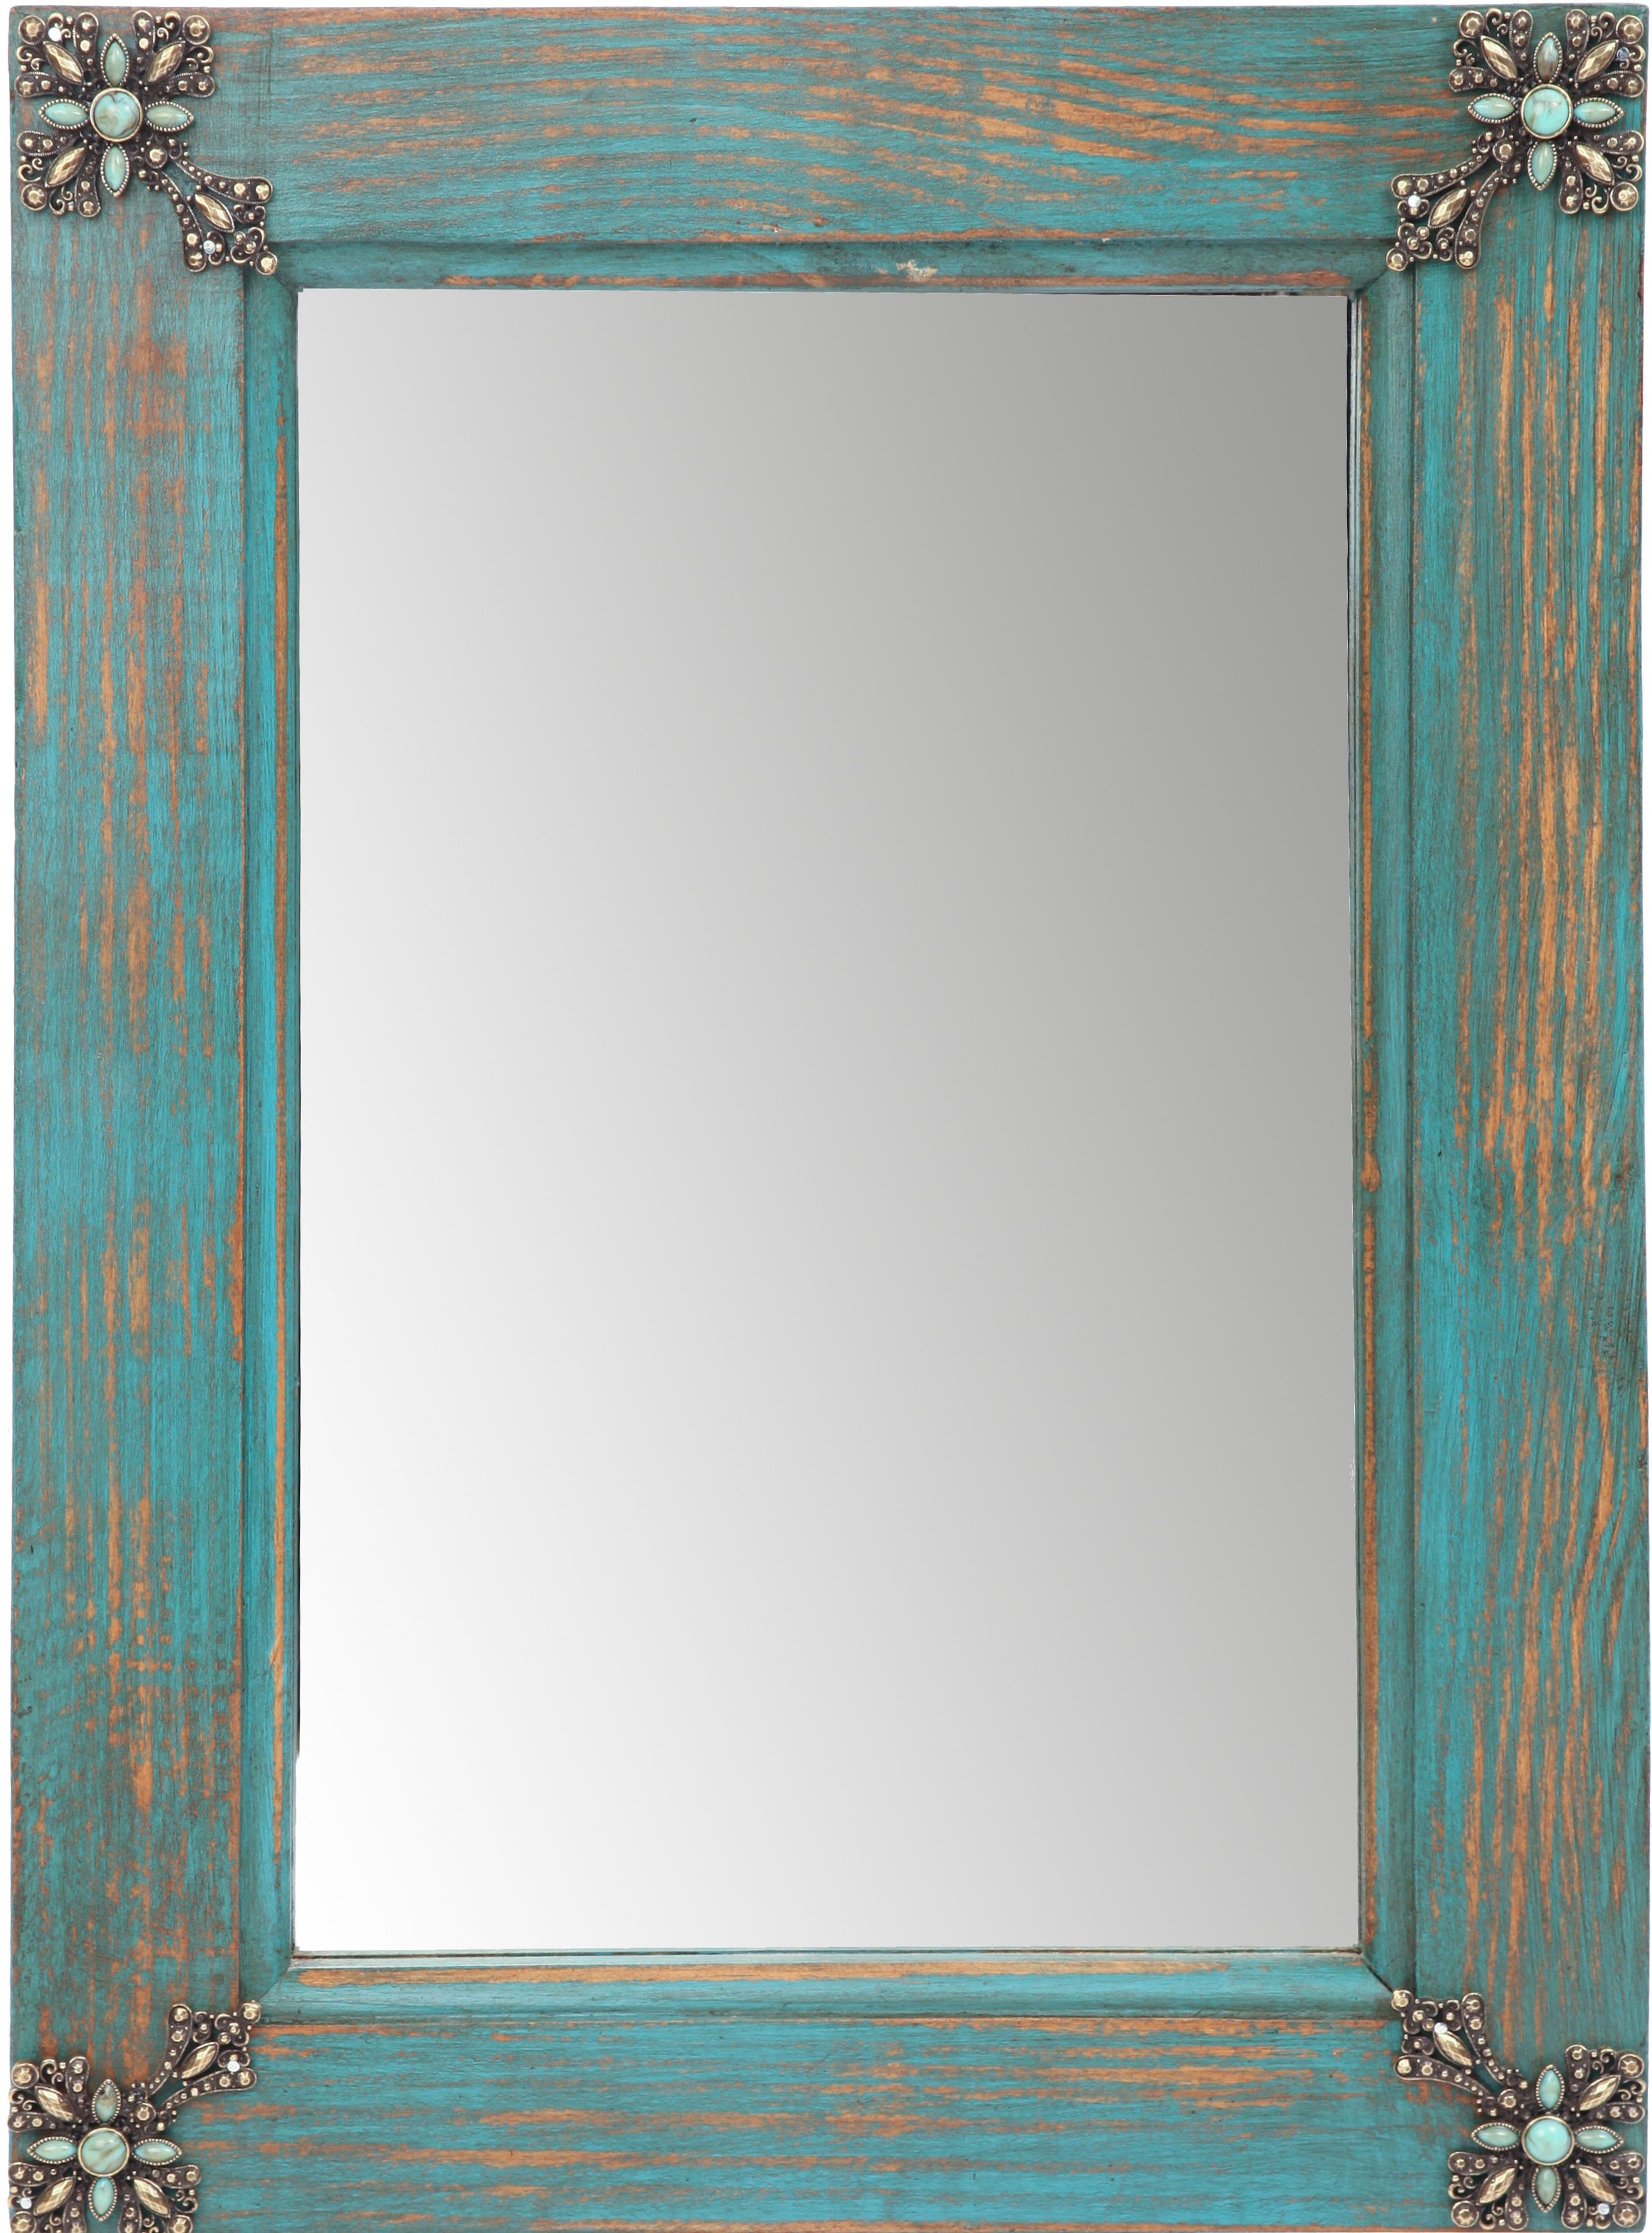 Wayfair Pertaining To Recent Lajoie Rustic Accent Mirrors (View 6 of 20)